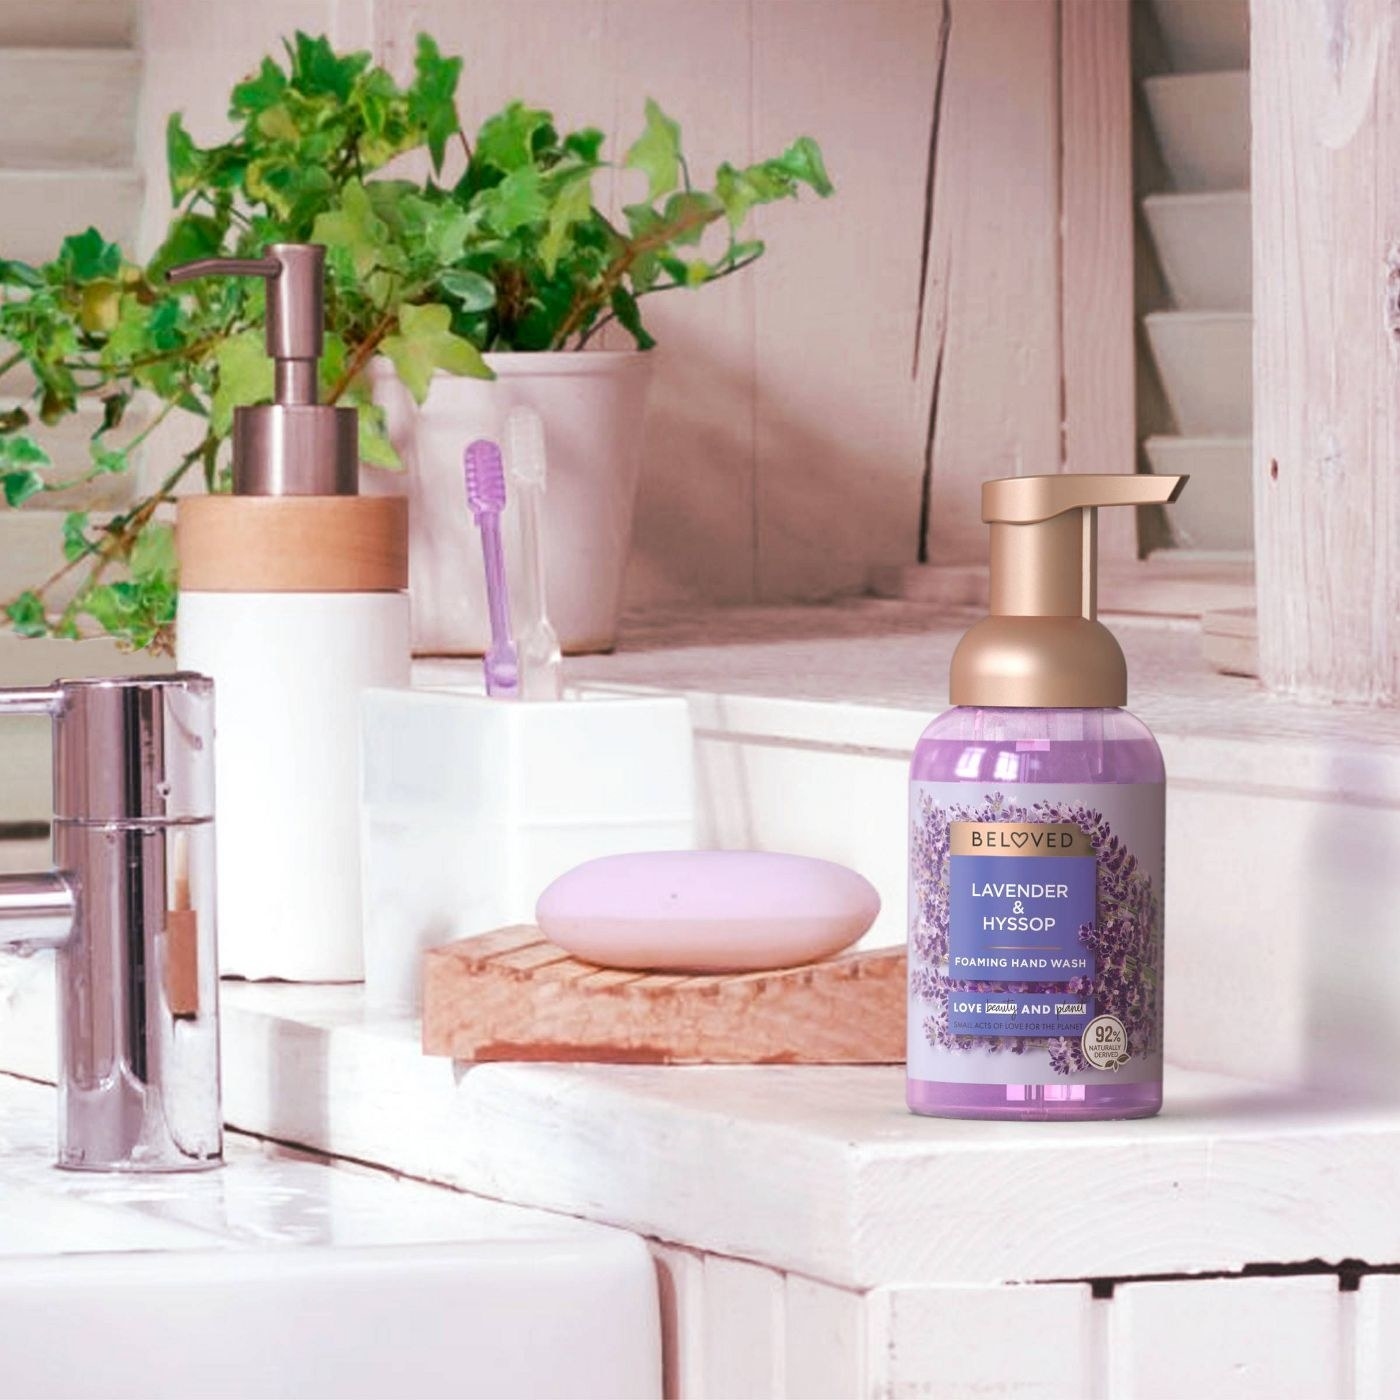 A gold-pumped lavender soap sits on a bathroom with lavender colored bar soap and toothbrushes